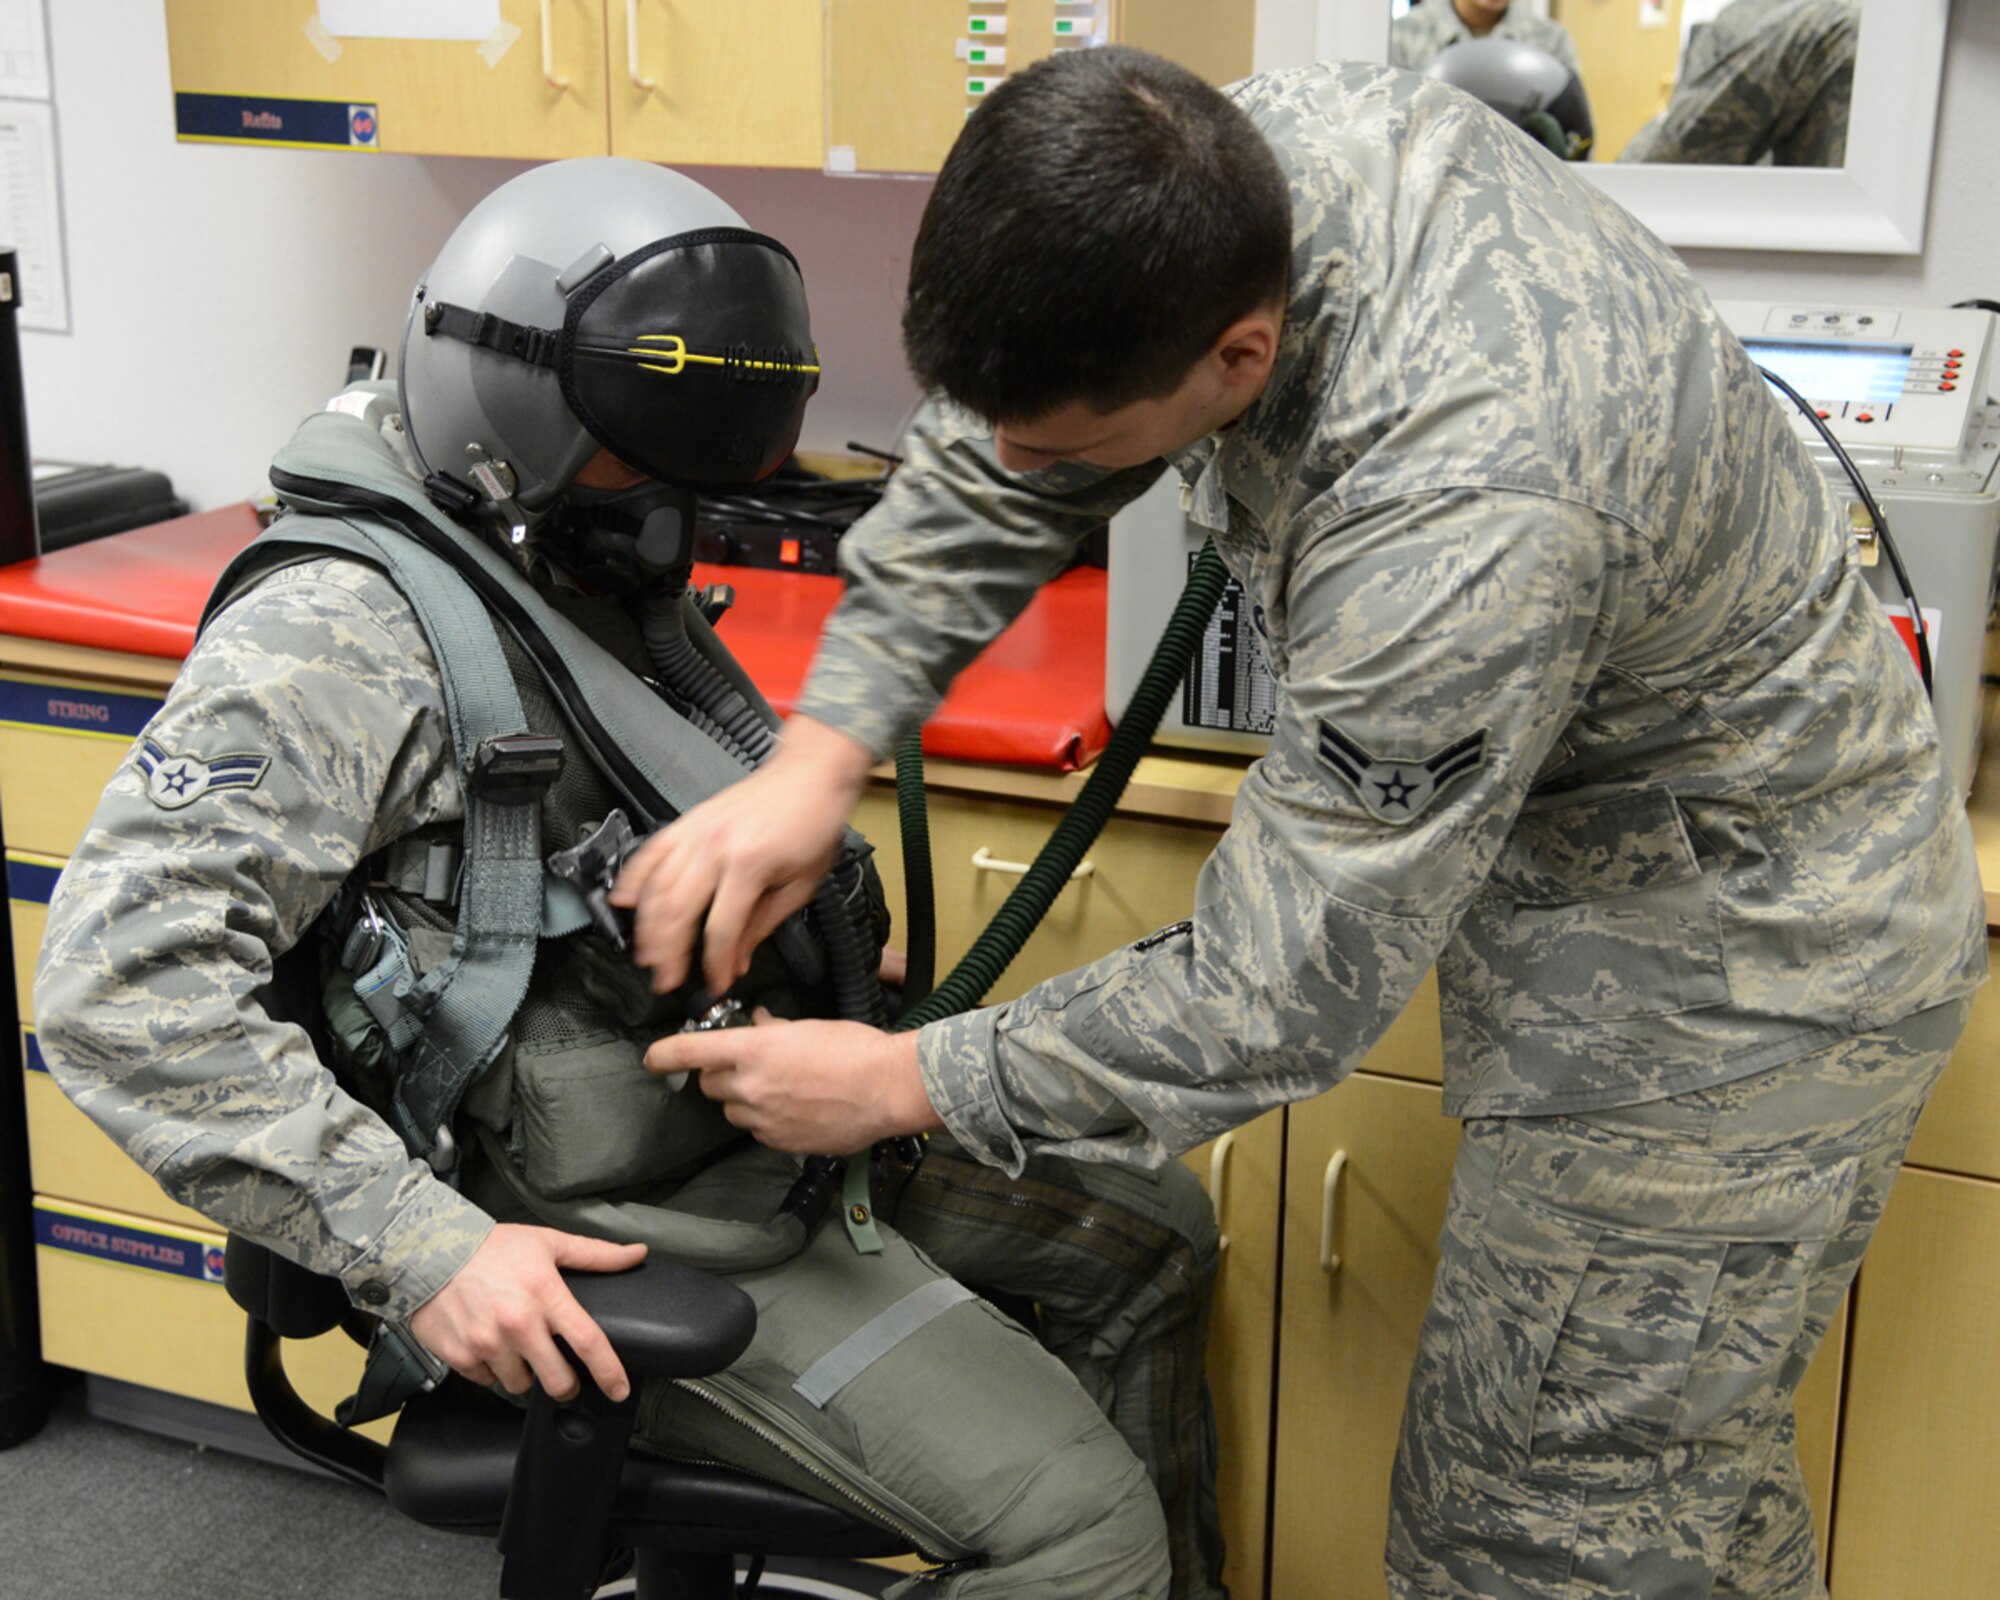 Airman 1st Class Jordan Theis, 3rd Operations Support Squadron, helps Airman 1st Class Grant Cook, 90th Aircraft Maintenance Unit, connect his aircrew flight equipment gear to an AFE tester at the 90th Fighter Squadron Nov. 15. (U.S. Air Force photo/Staff Sgt. Blake Mize)